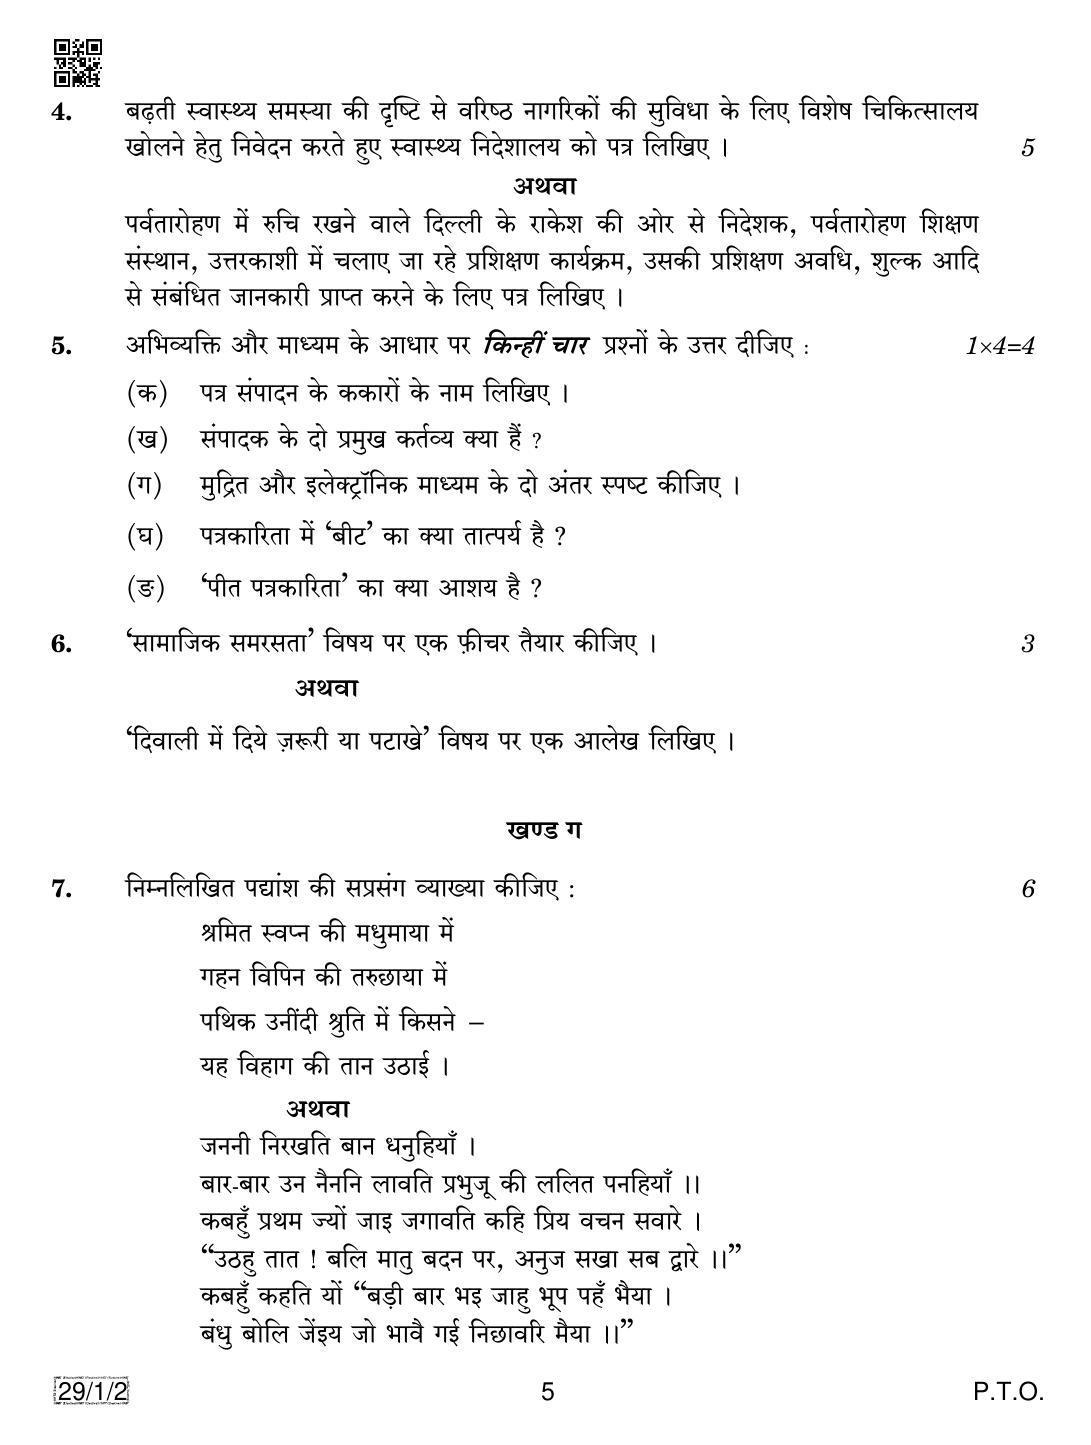 CBSE Class 12 29-1-2 HINDI ELECTIVE 2019 Compartment Question Paper - Page 5